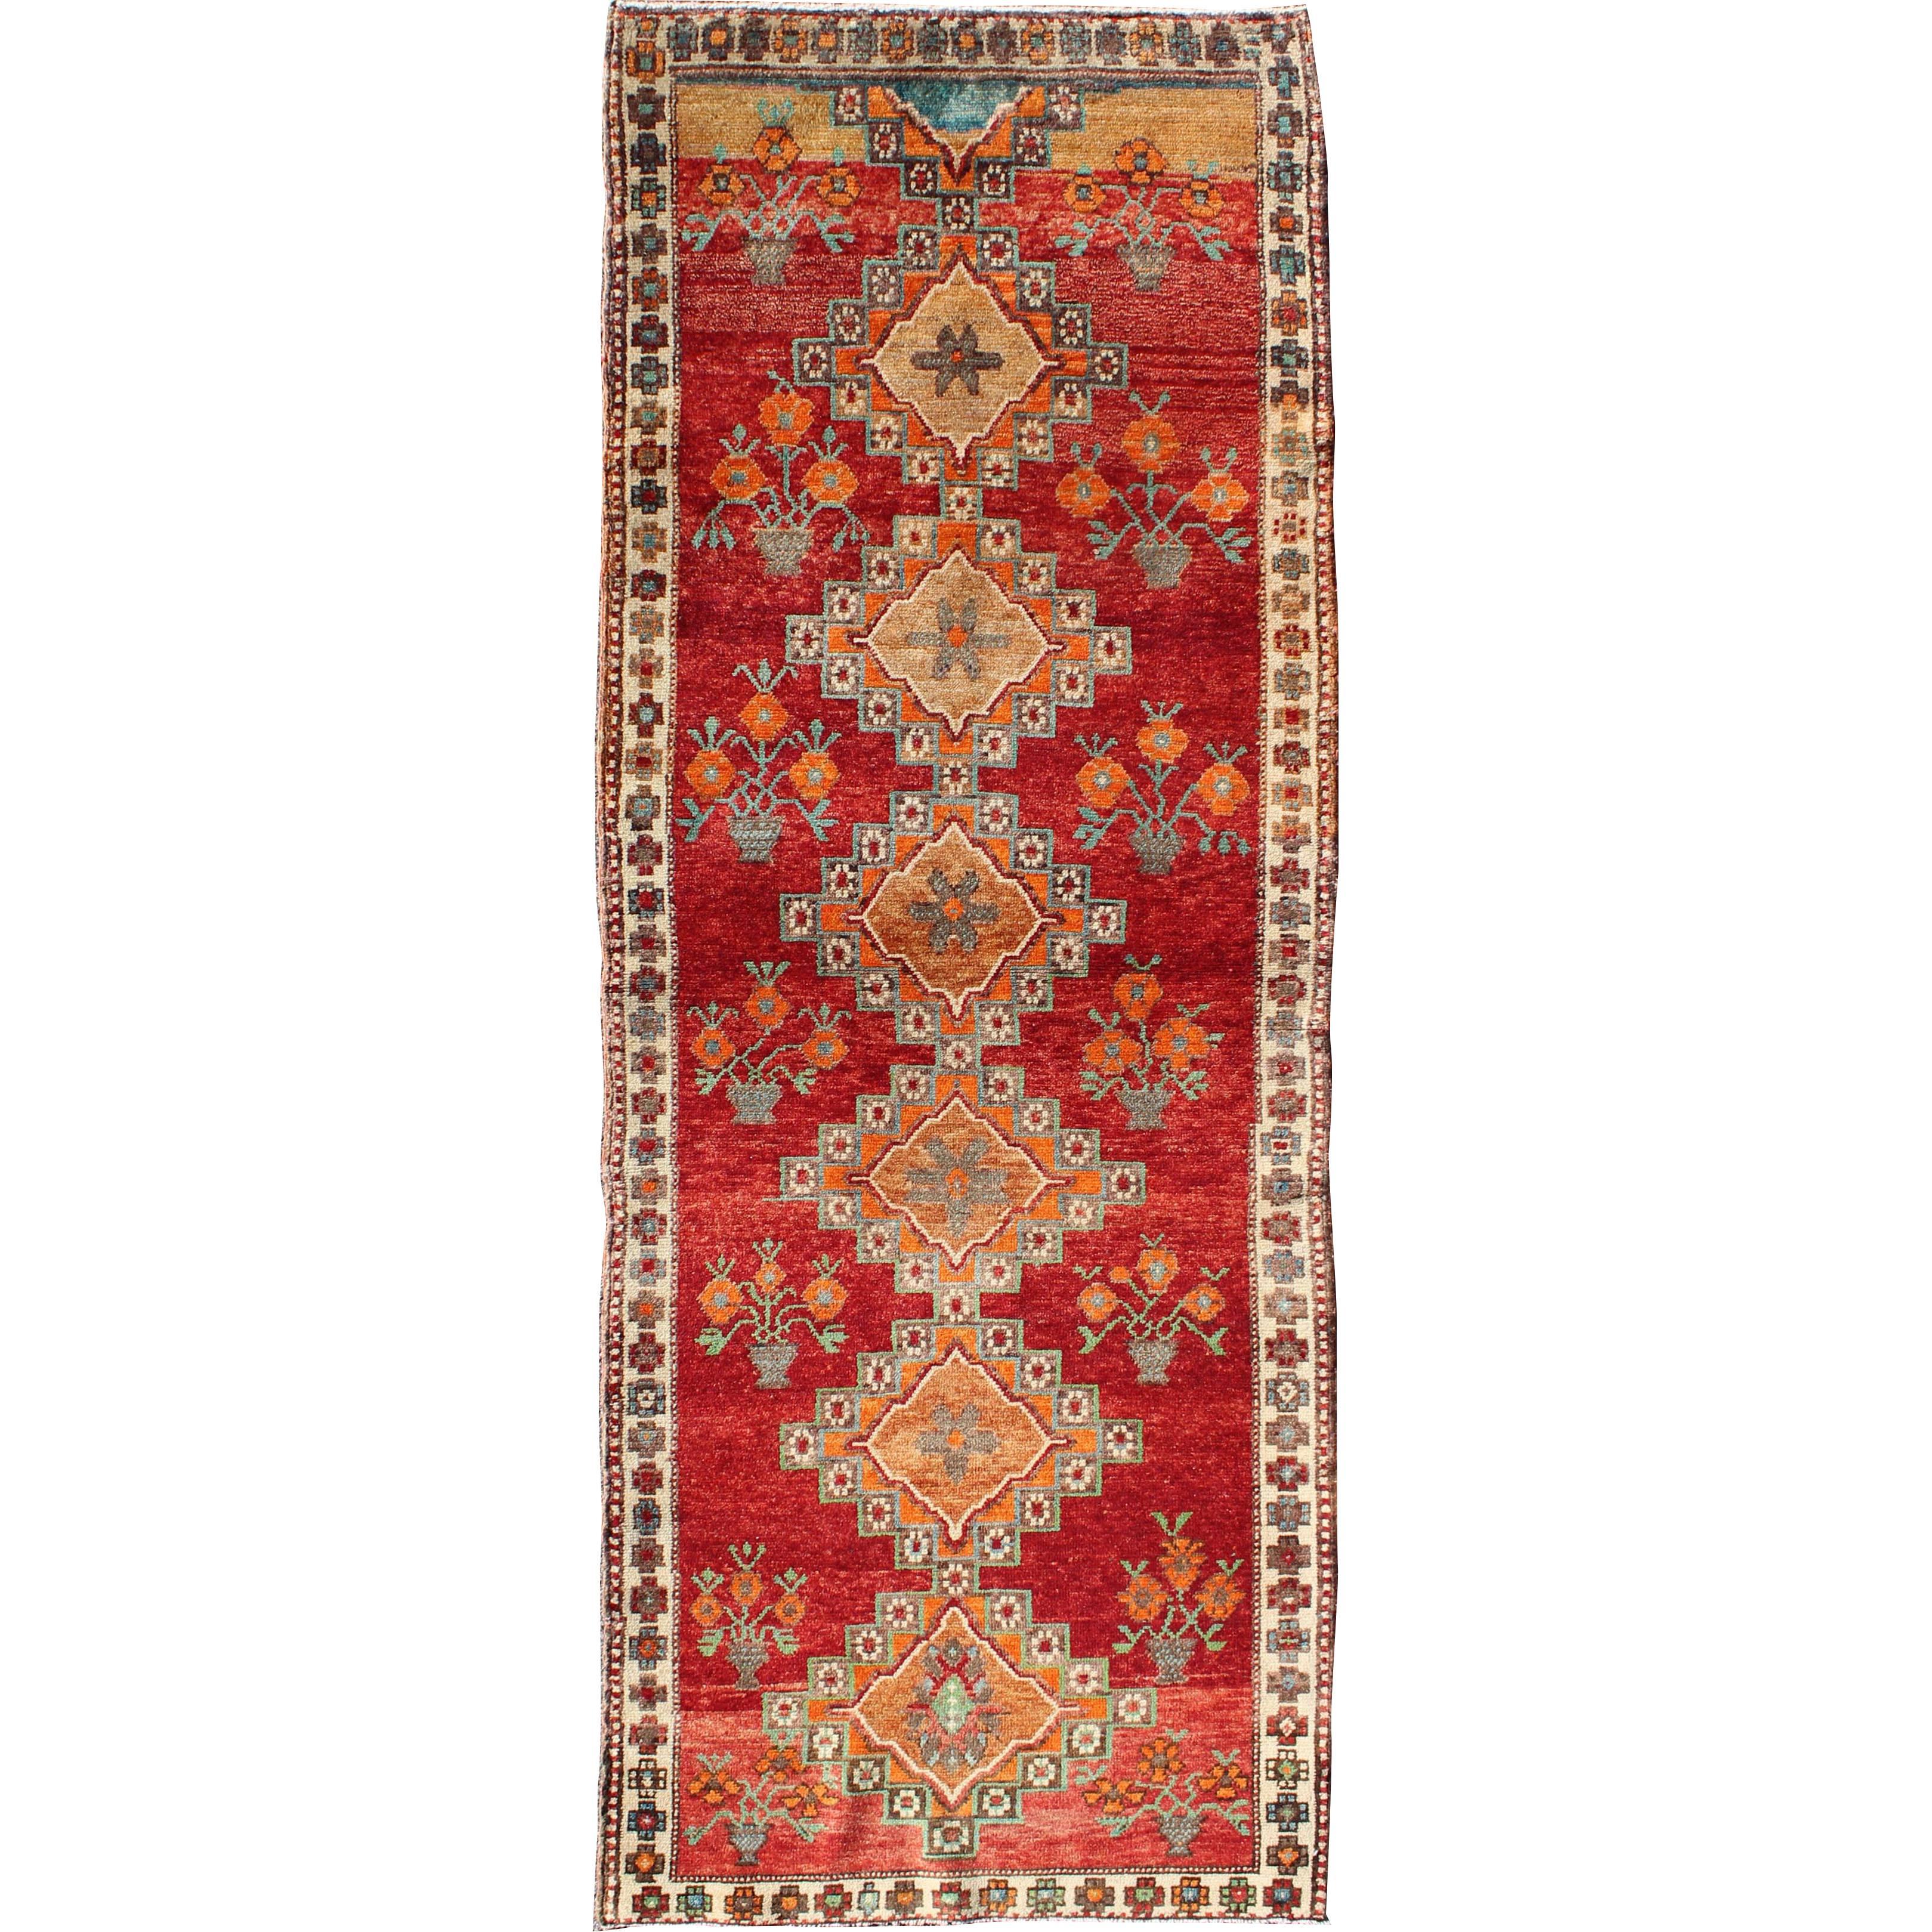 Vintage Turkish Oushak Runner in Beautiful Royal Red, Light Blue/Gray and Orange For Sale